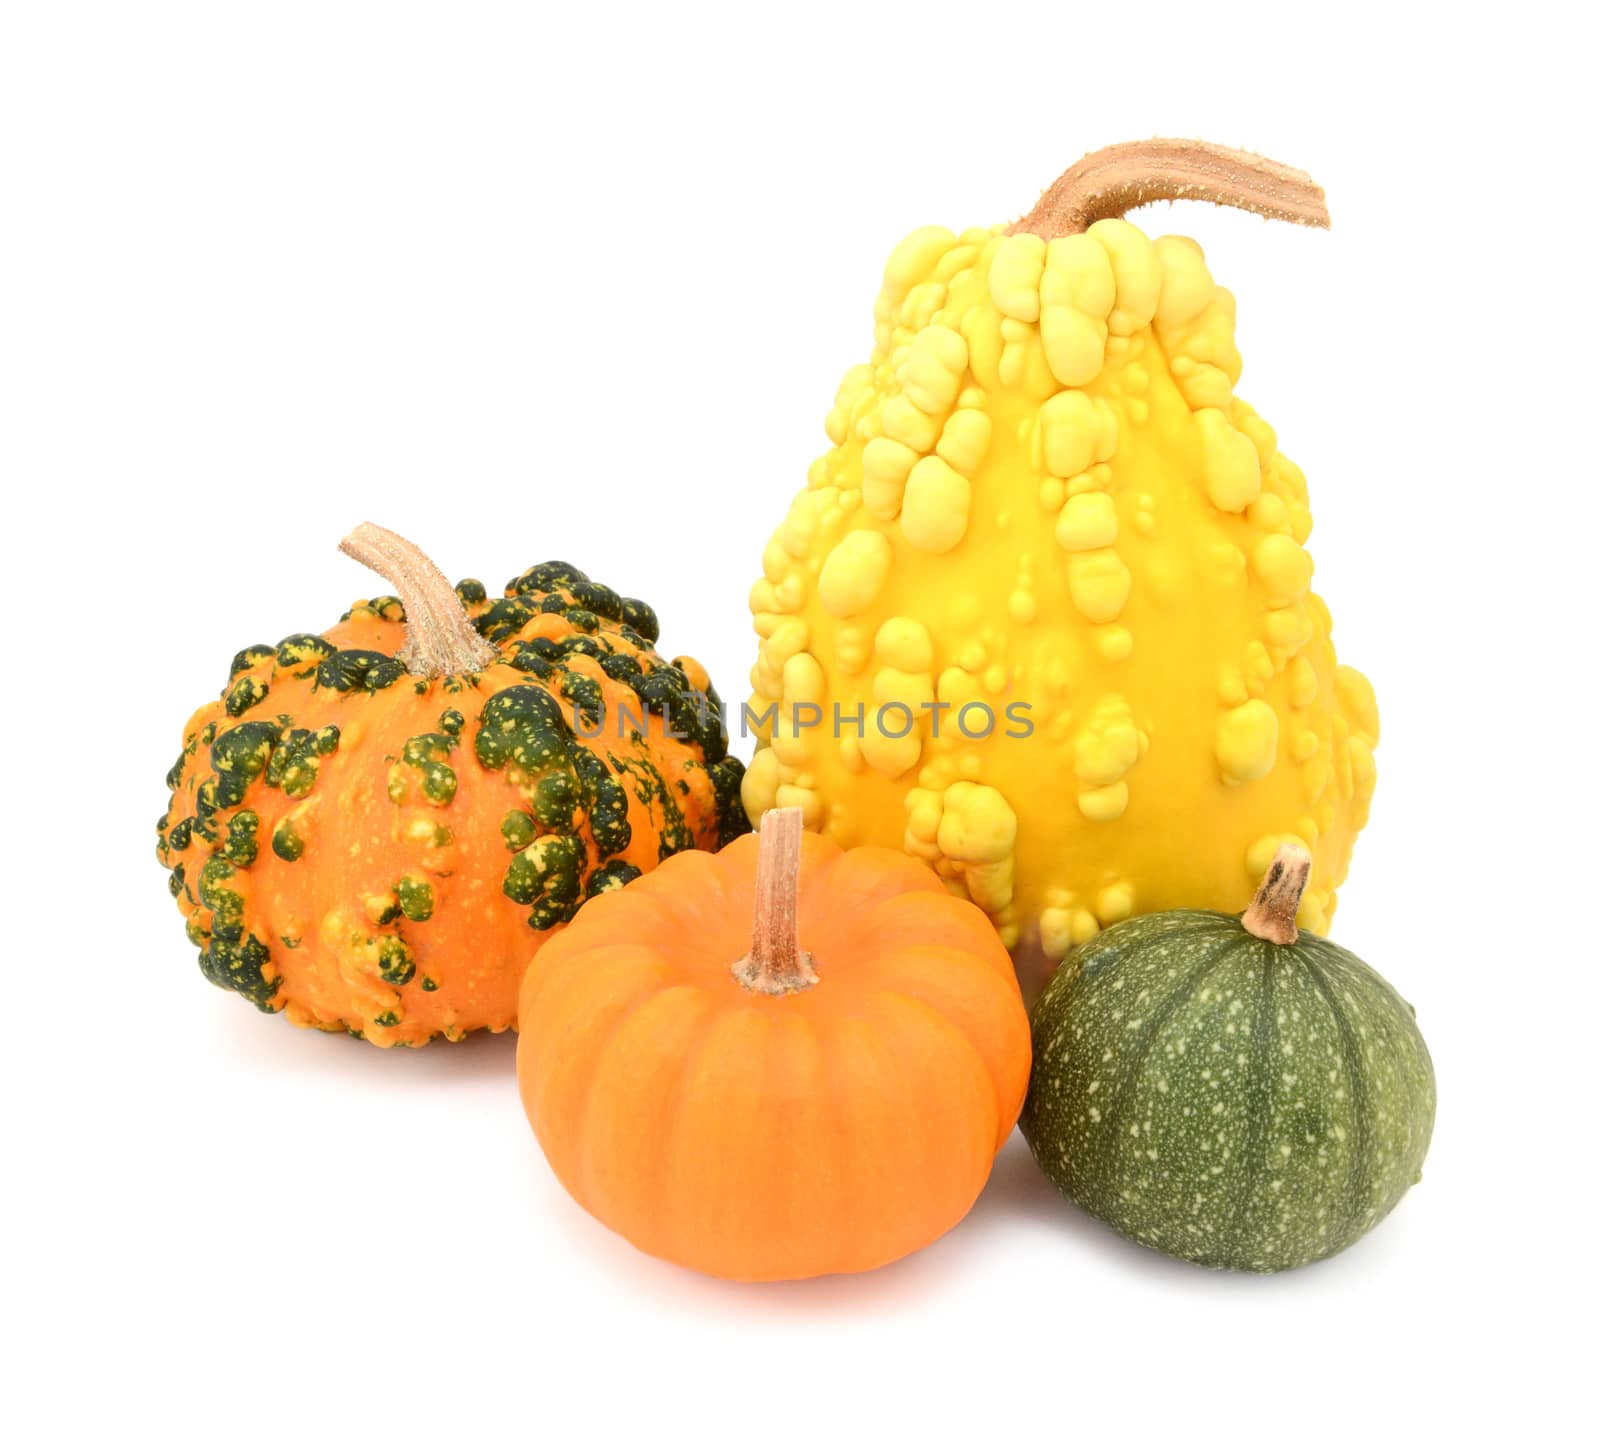 Group of five ornamental gourds with orange, yellow and green skins, on a white background